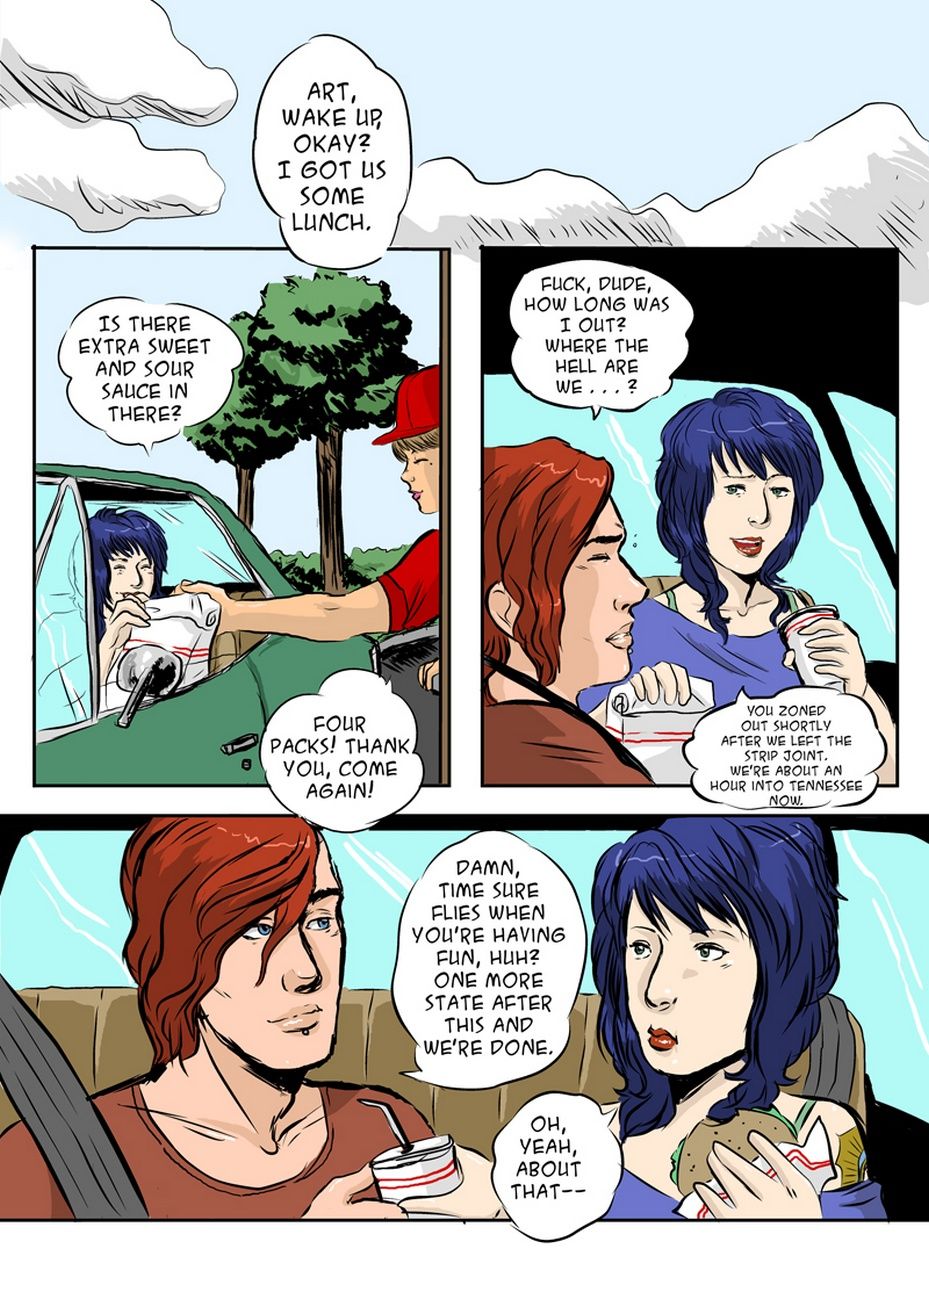 Cruise Control 4 - Wish You Were Here page 2